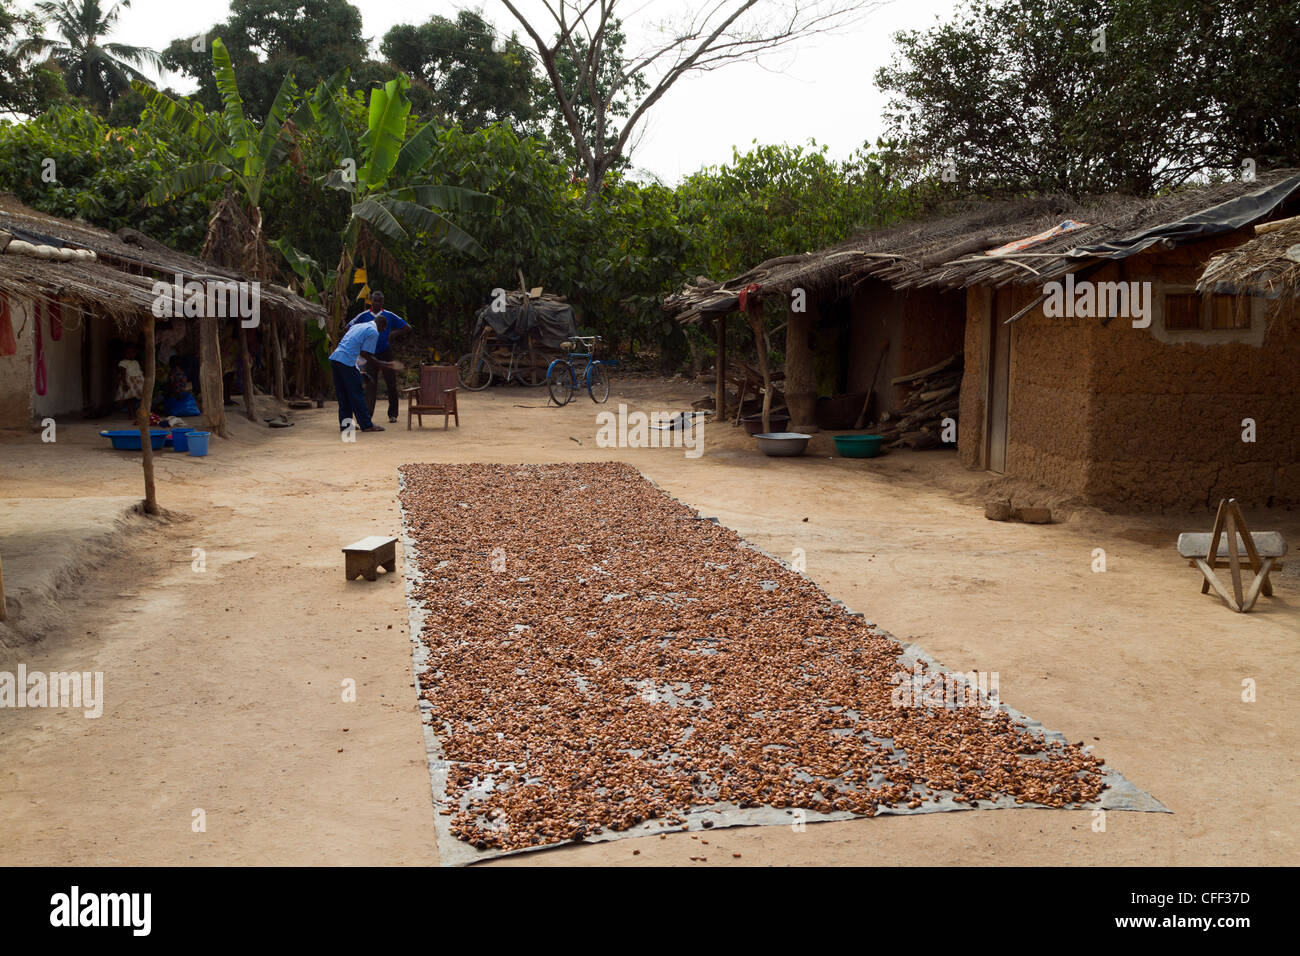 Air-drying cacao beans Near Duekoue ,Ivory Coast ,Cote d'Ivoire,West Africa Stock Photo